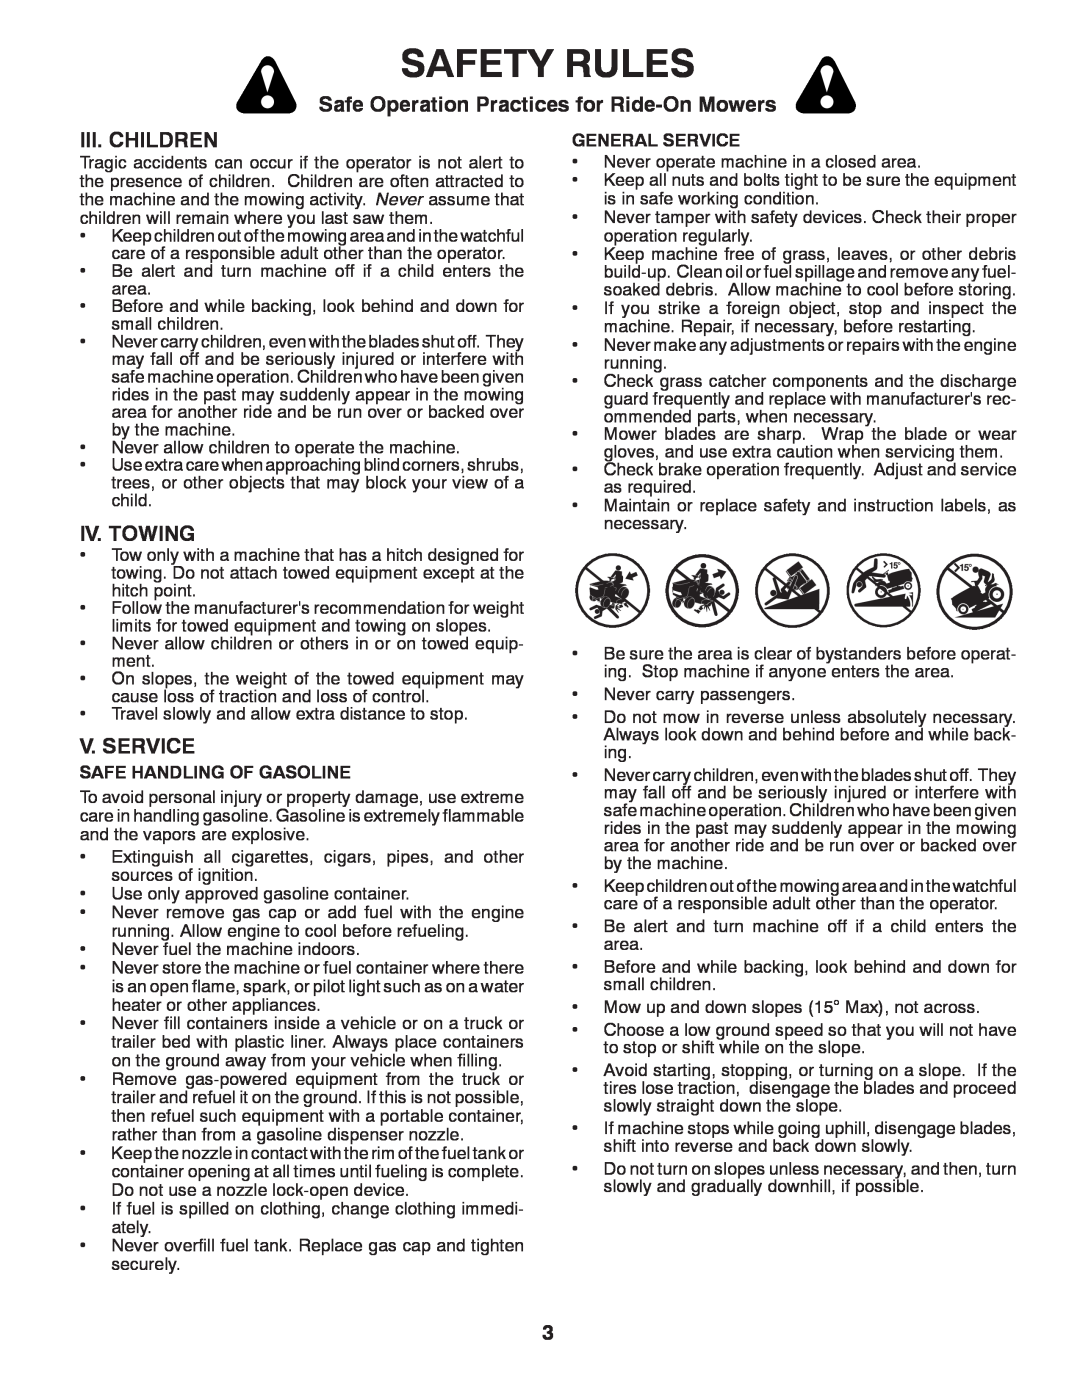 Husqvarna 532 42 89-49 Iii. Children, Iv. Towing, V. Service, Safety Rules, Safe Operation Practices for Ride-On Mowers 